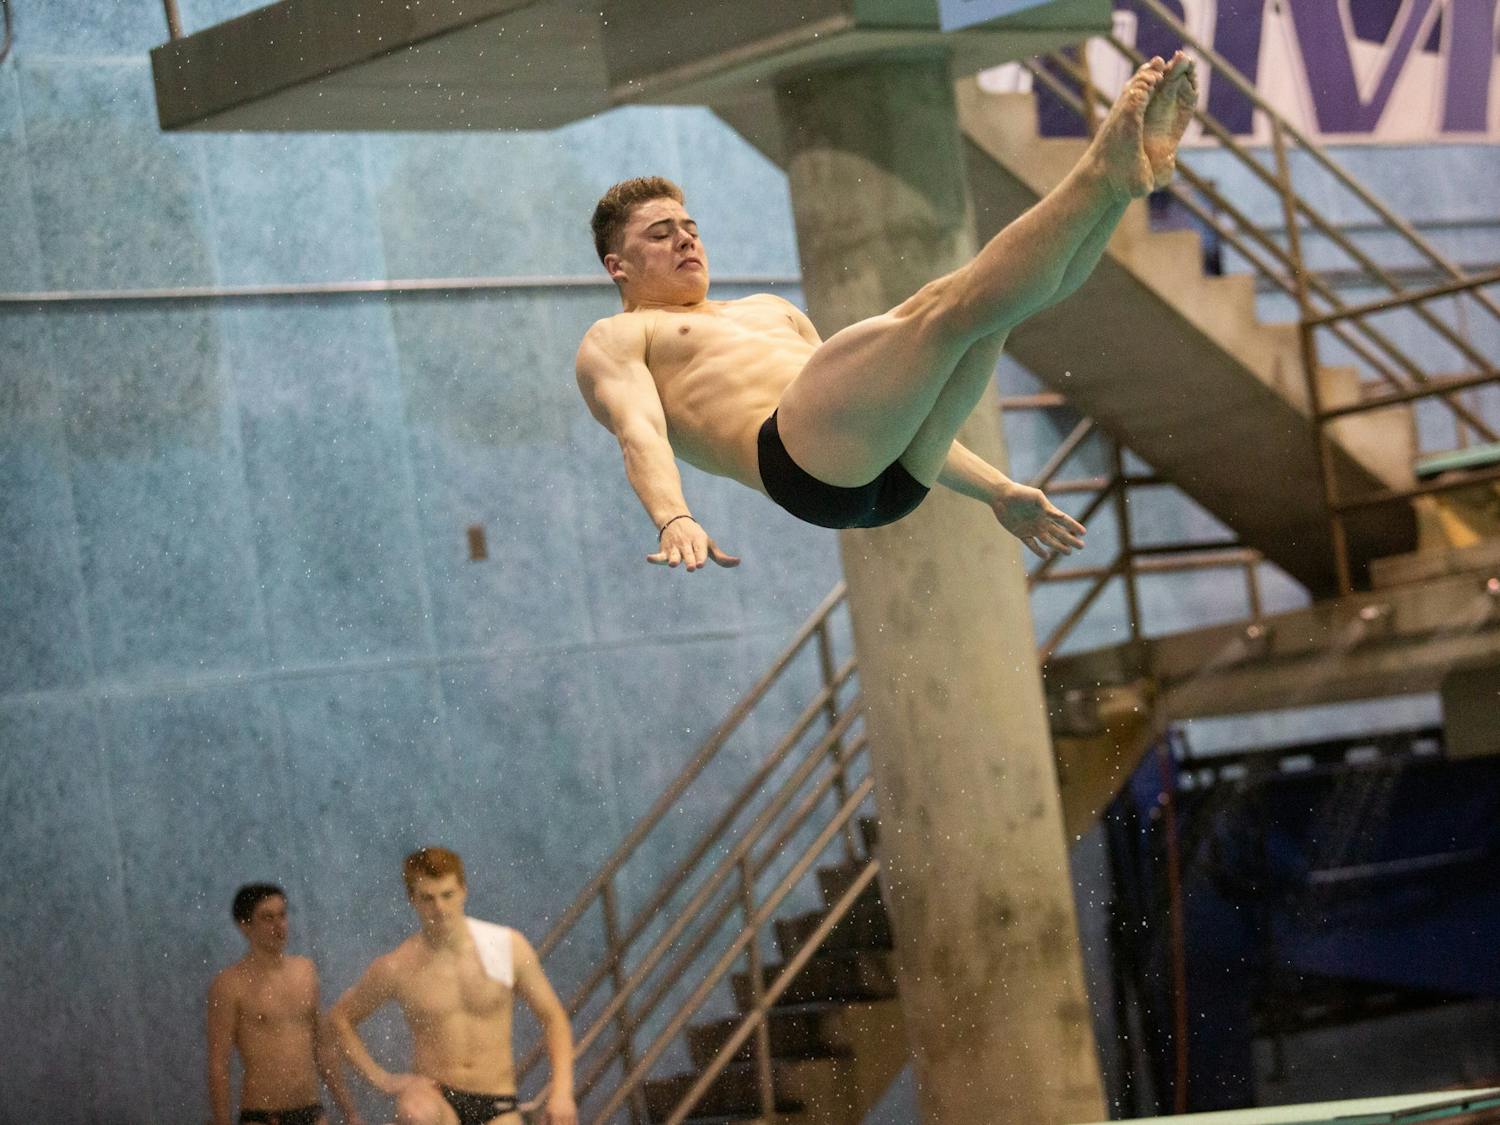 UNC first-year diver Alex Hart competes during a meet against NC State in Koury Natatorium on Friday, Jan. 17, 2020. Hart won the 1-meter and 3-meter diving events in the Tar Heels' loss to the Wolfpack 187.5- 112.5 in men's and 182-118 women's.